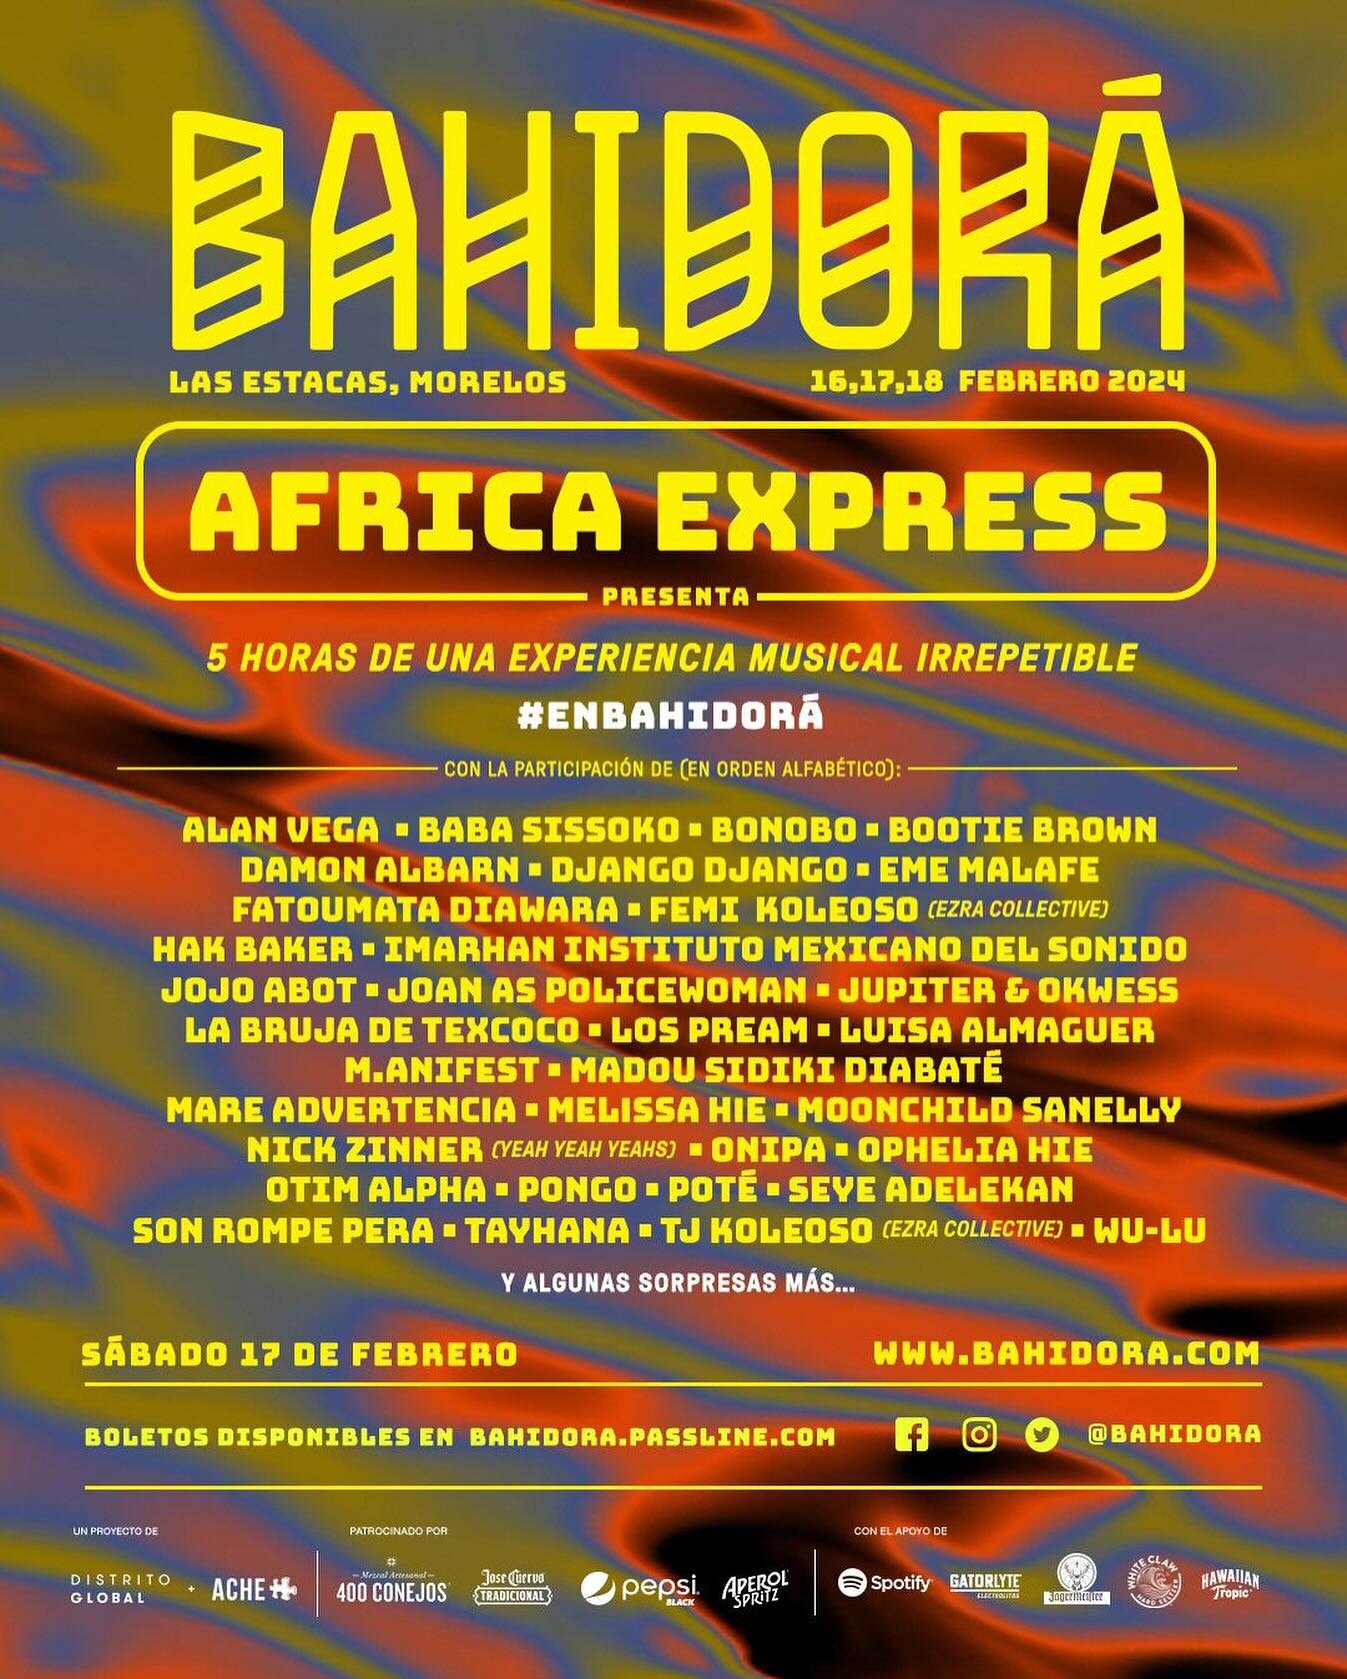 There are a few tickets left for the @bahidora festival starting tomorrow 16-18. I am here with @africaexpresshq and the first day of rehearsals have gone gorgeously. We play for 5 hours yes five hours on Sat. Come if you&rsquo;re a couple of hours s